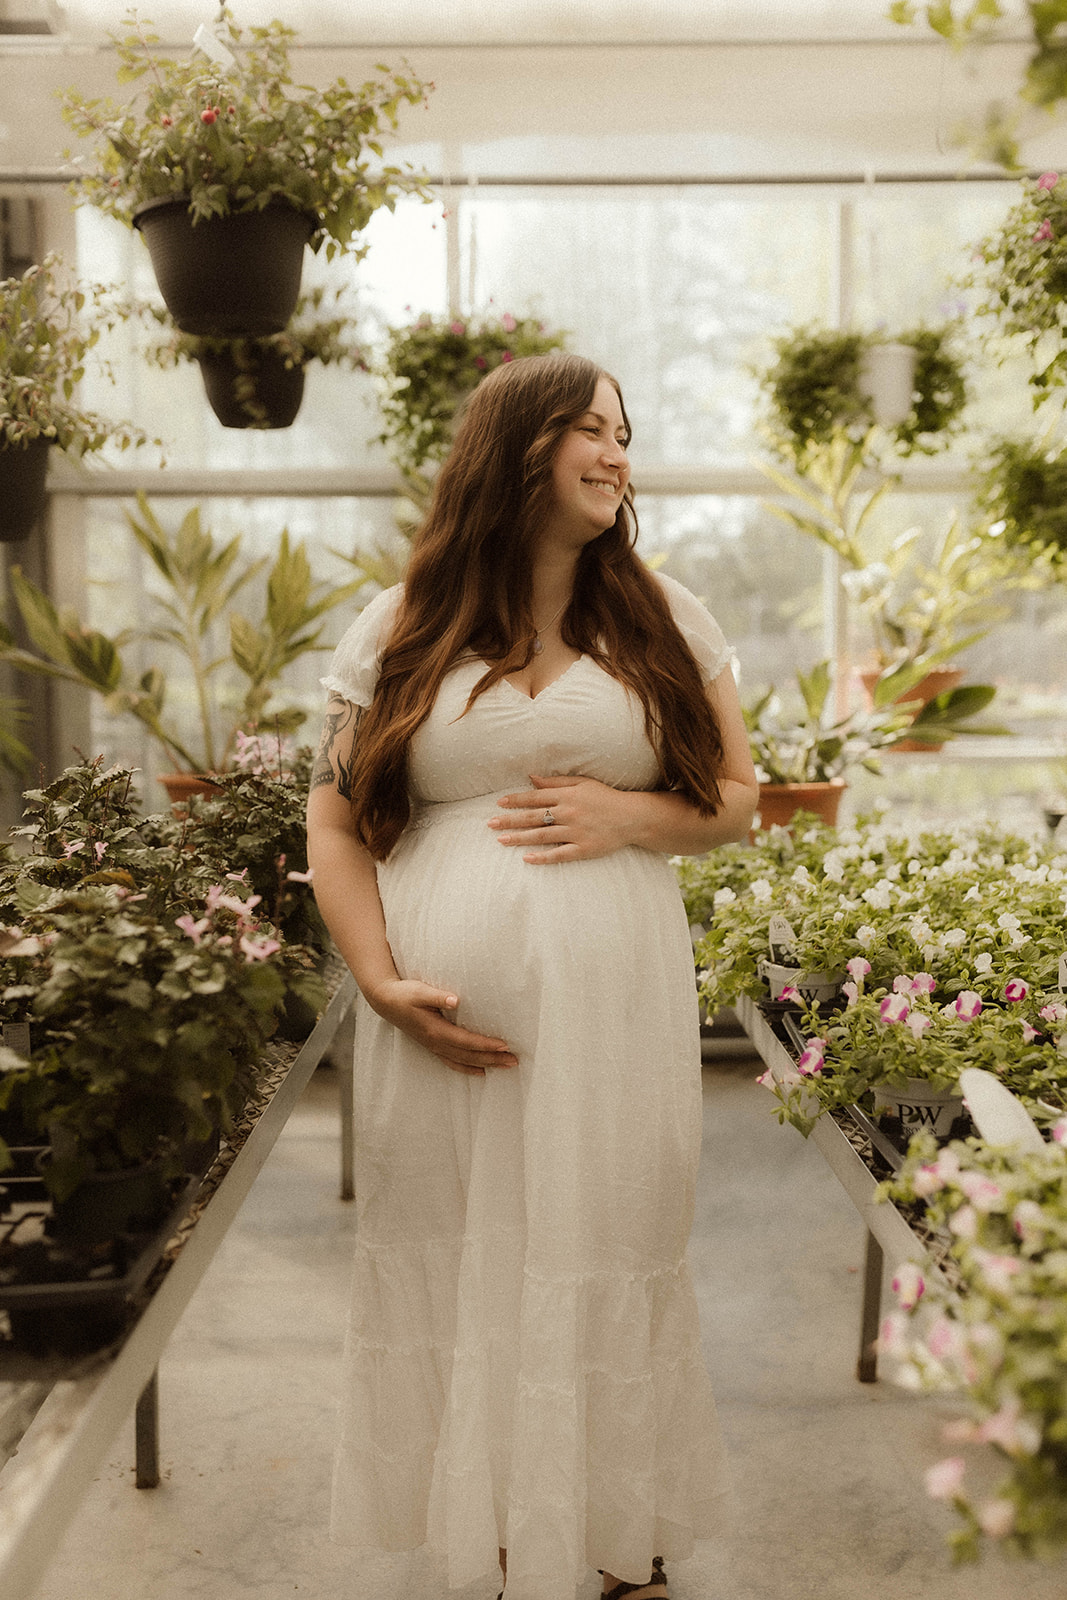 Stunning soon to be mother poses with flowers during her unique maternity shoot